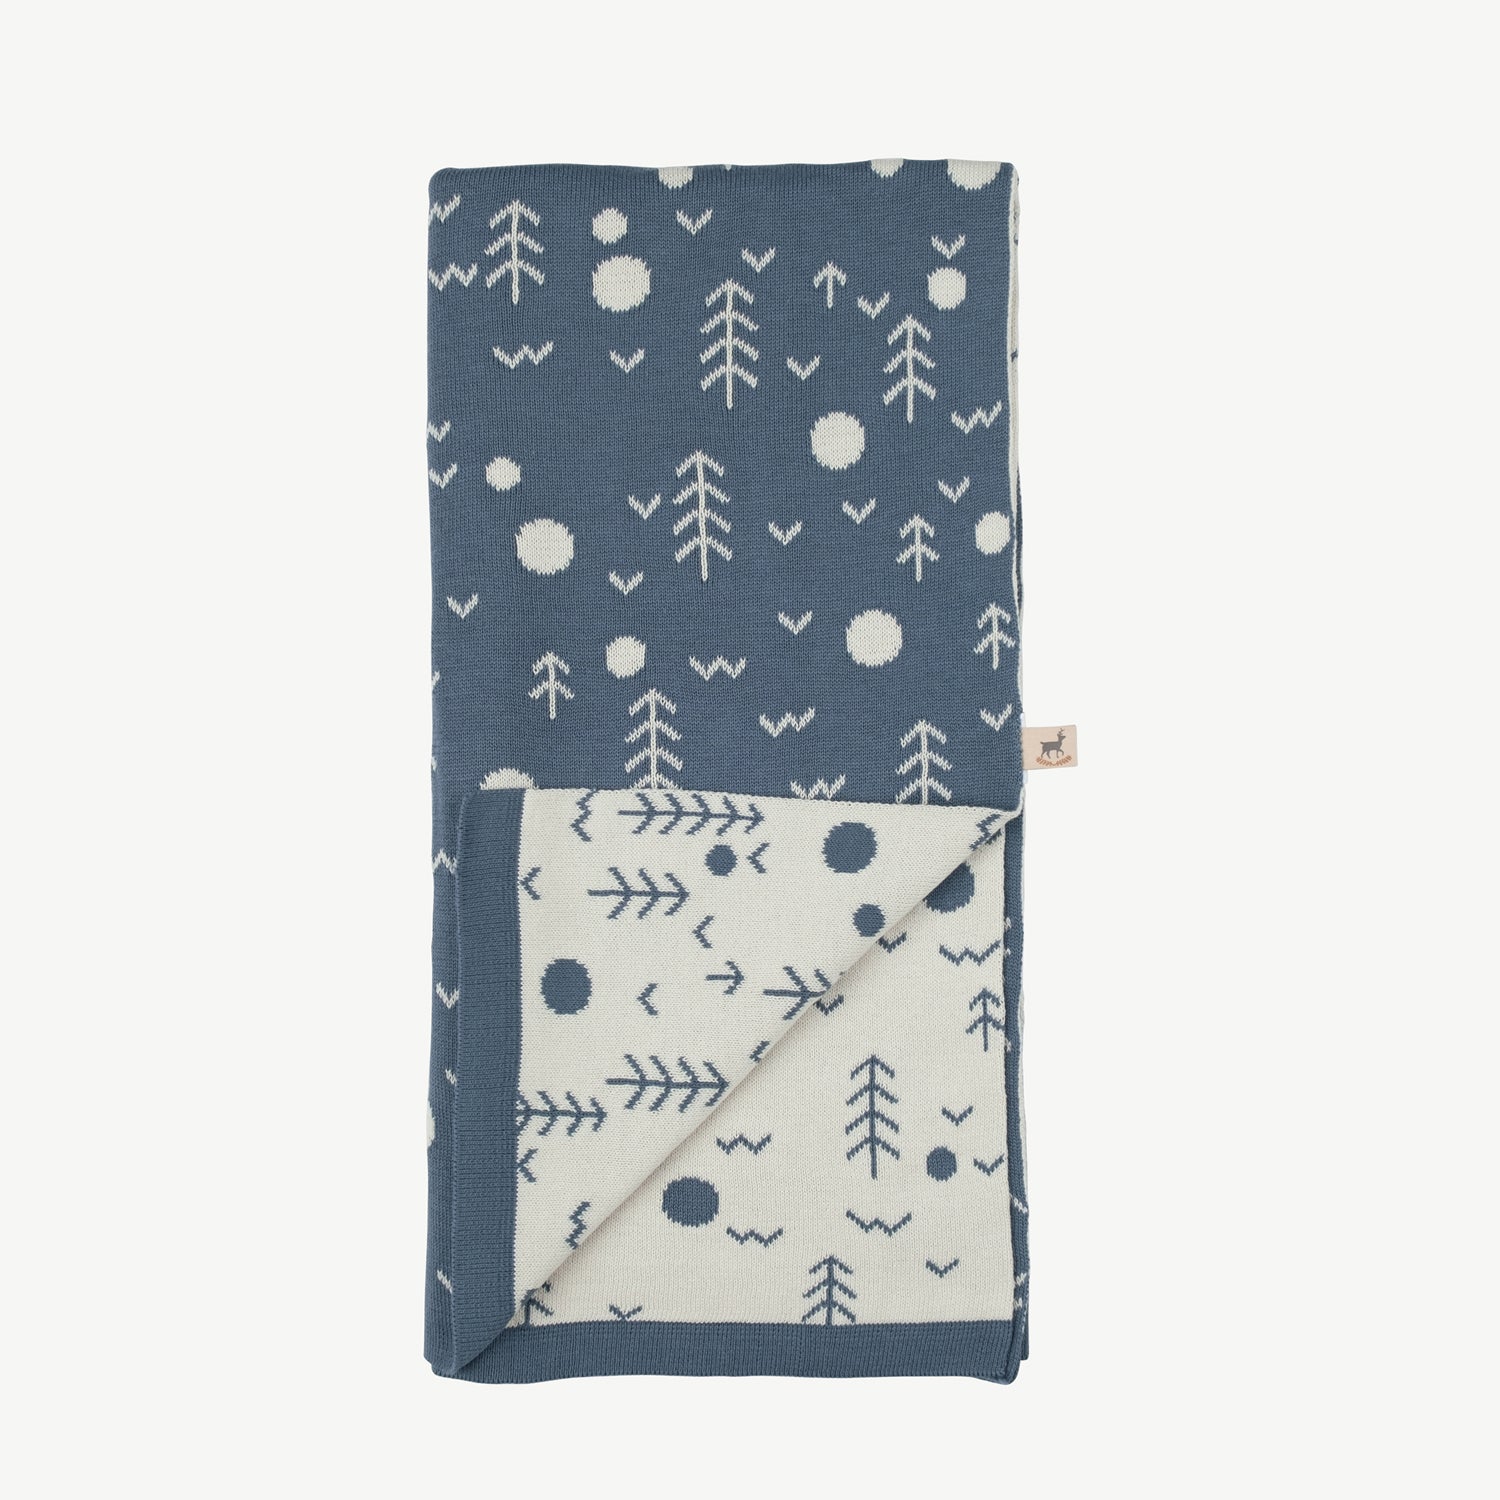 'the woods' blue mirage knit blanket